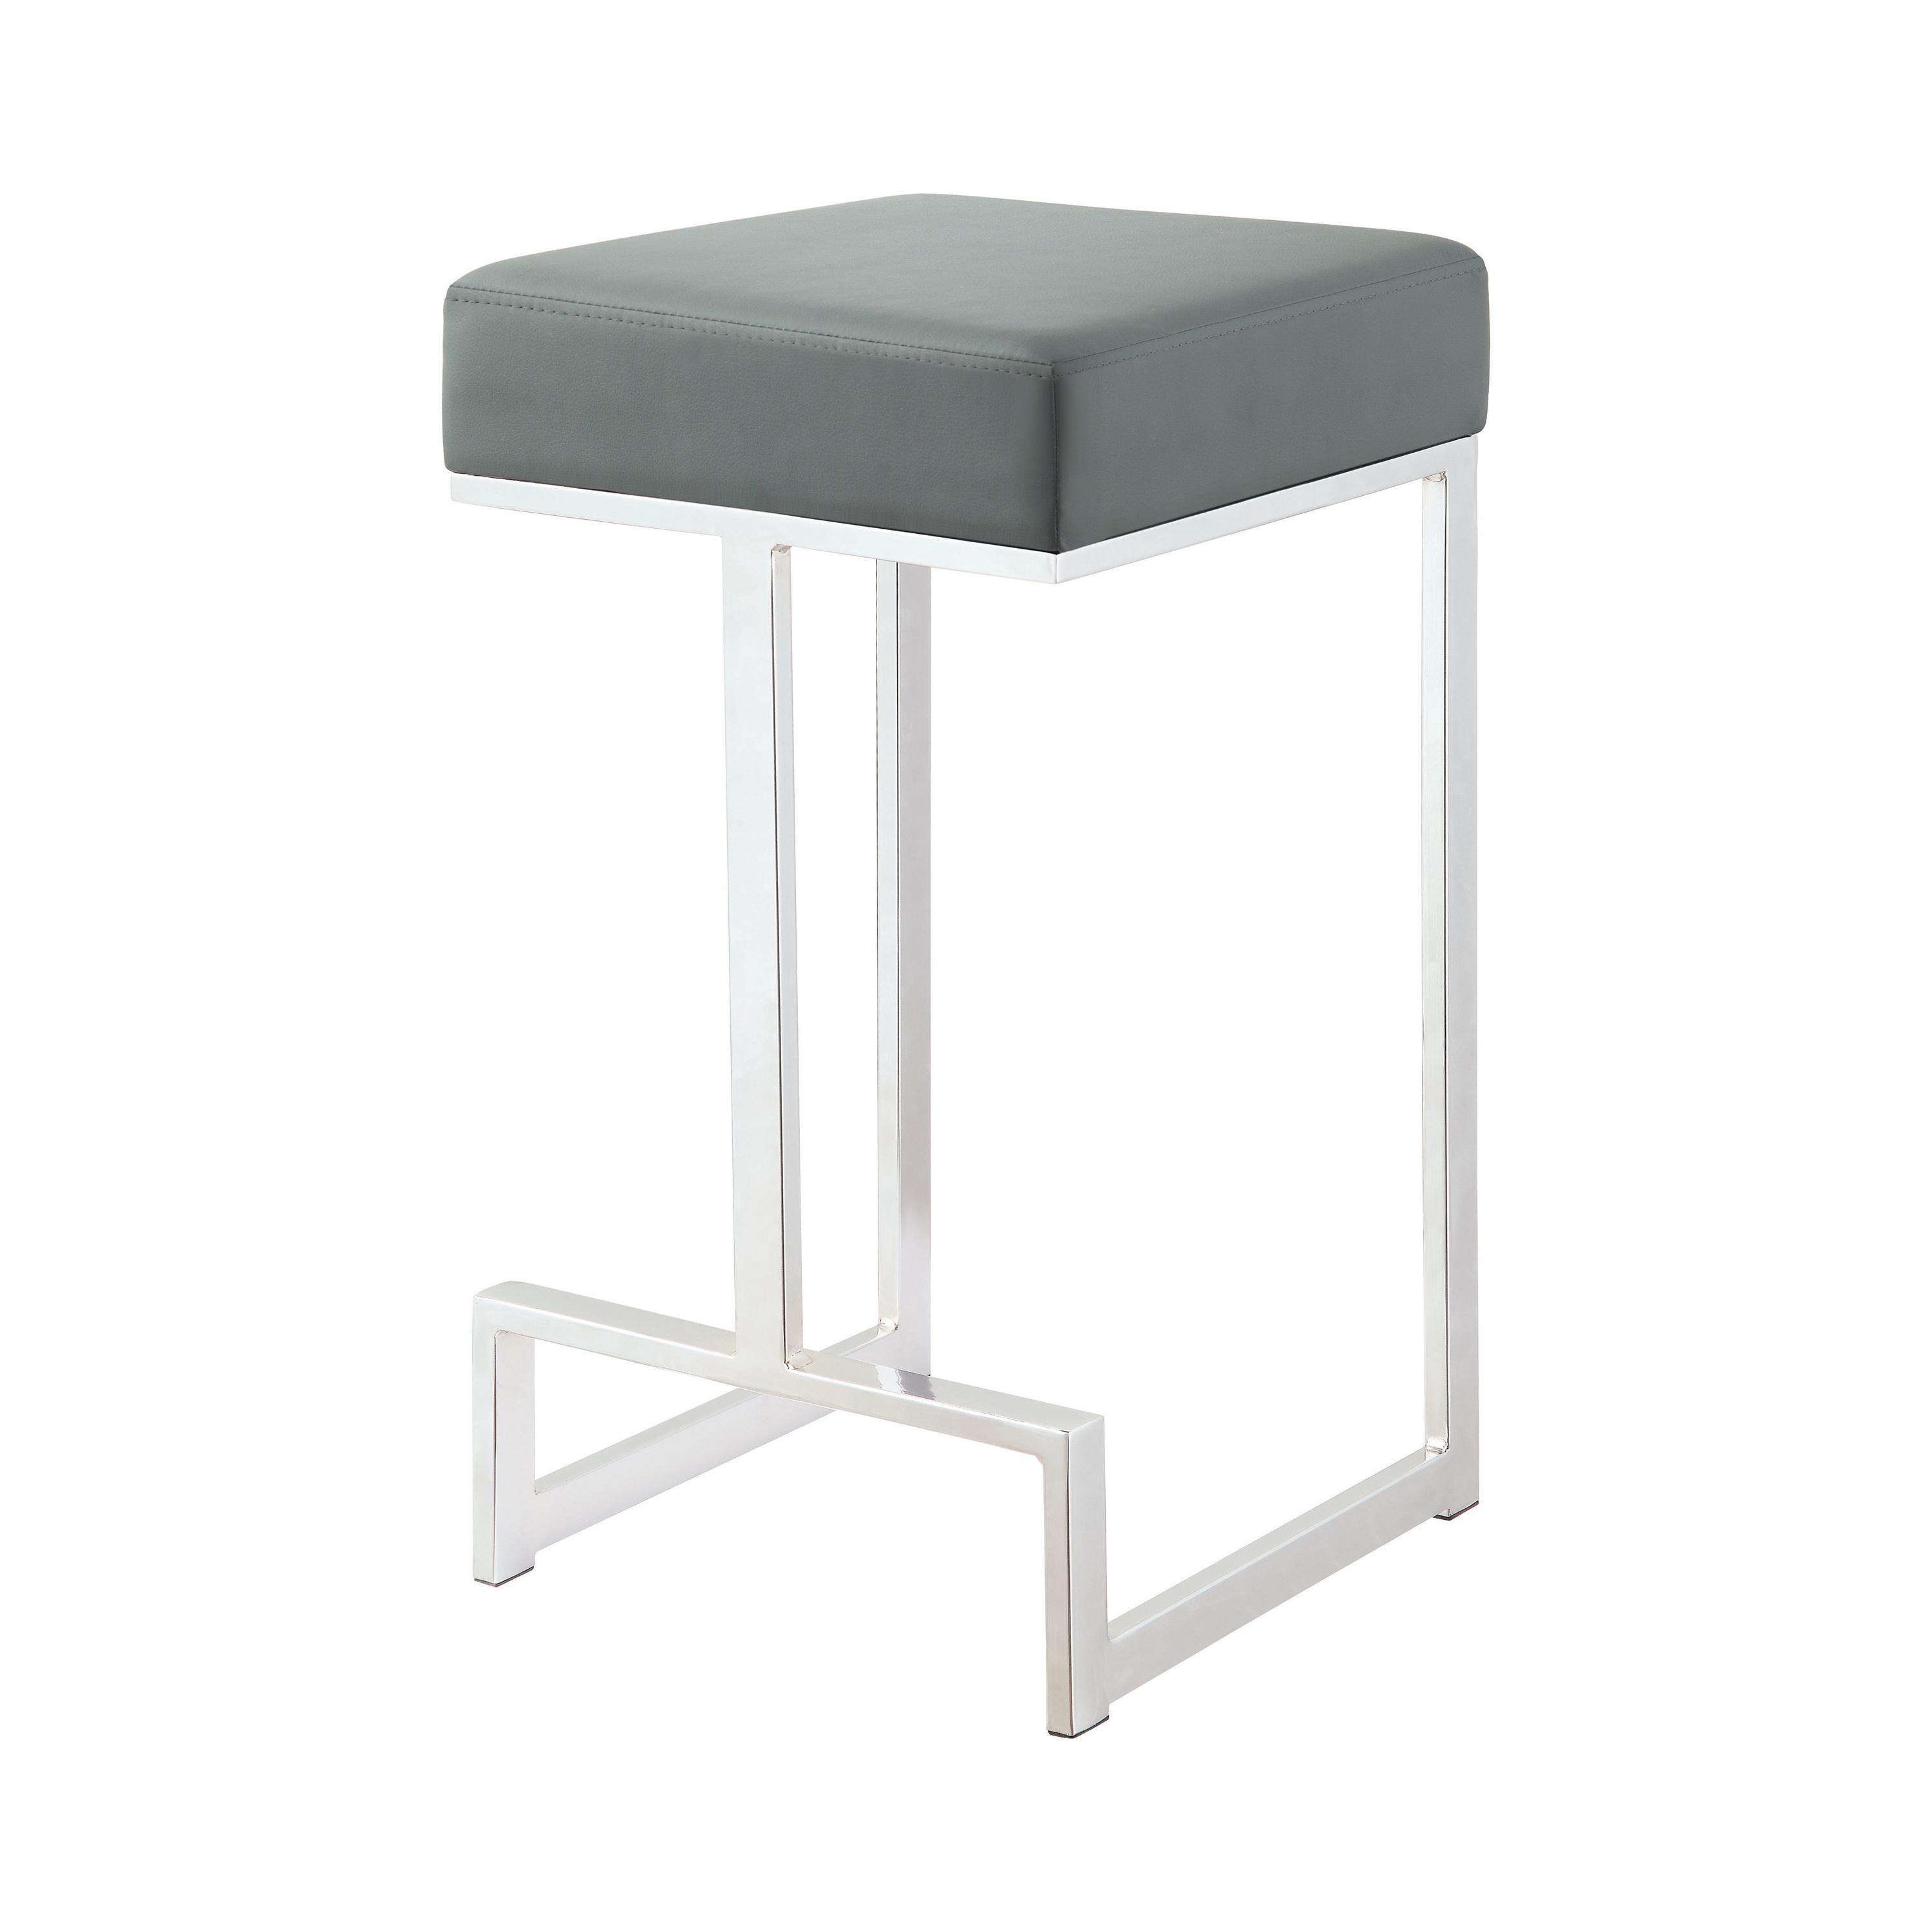 Modern Counter Height Stool 105252 105252 in Gray Leatherette